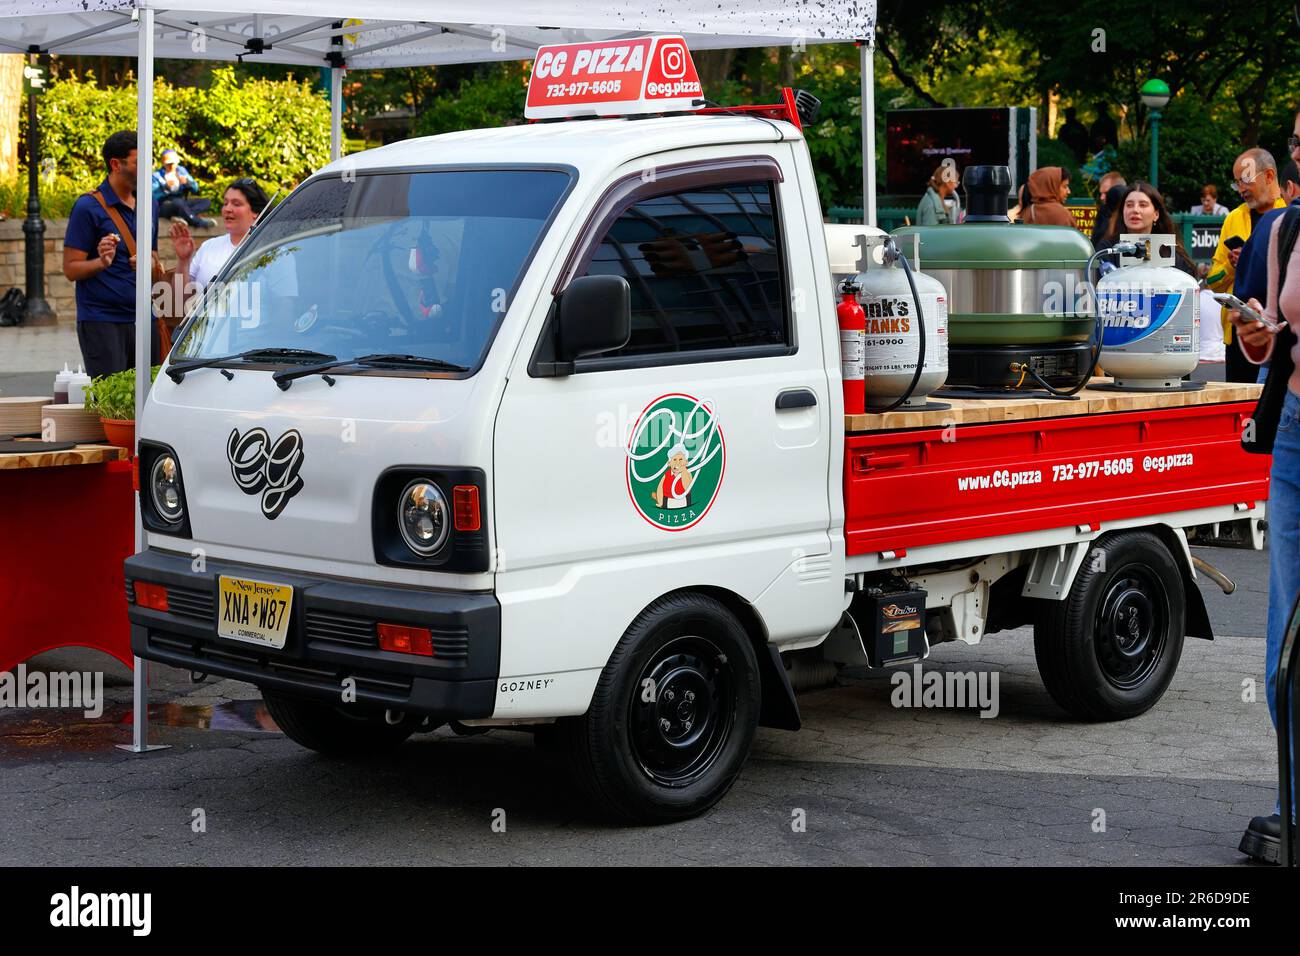 A 1990s era Mitsubishi Minicab Japanese Kei mini truck converted to carry portable pizza ovens for CG Pizza popup events. Stock Photo